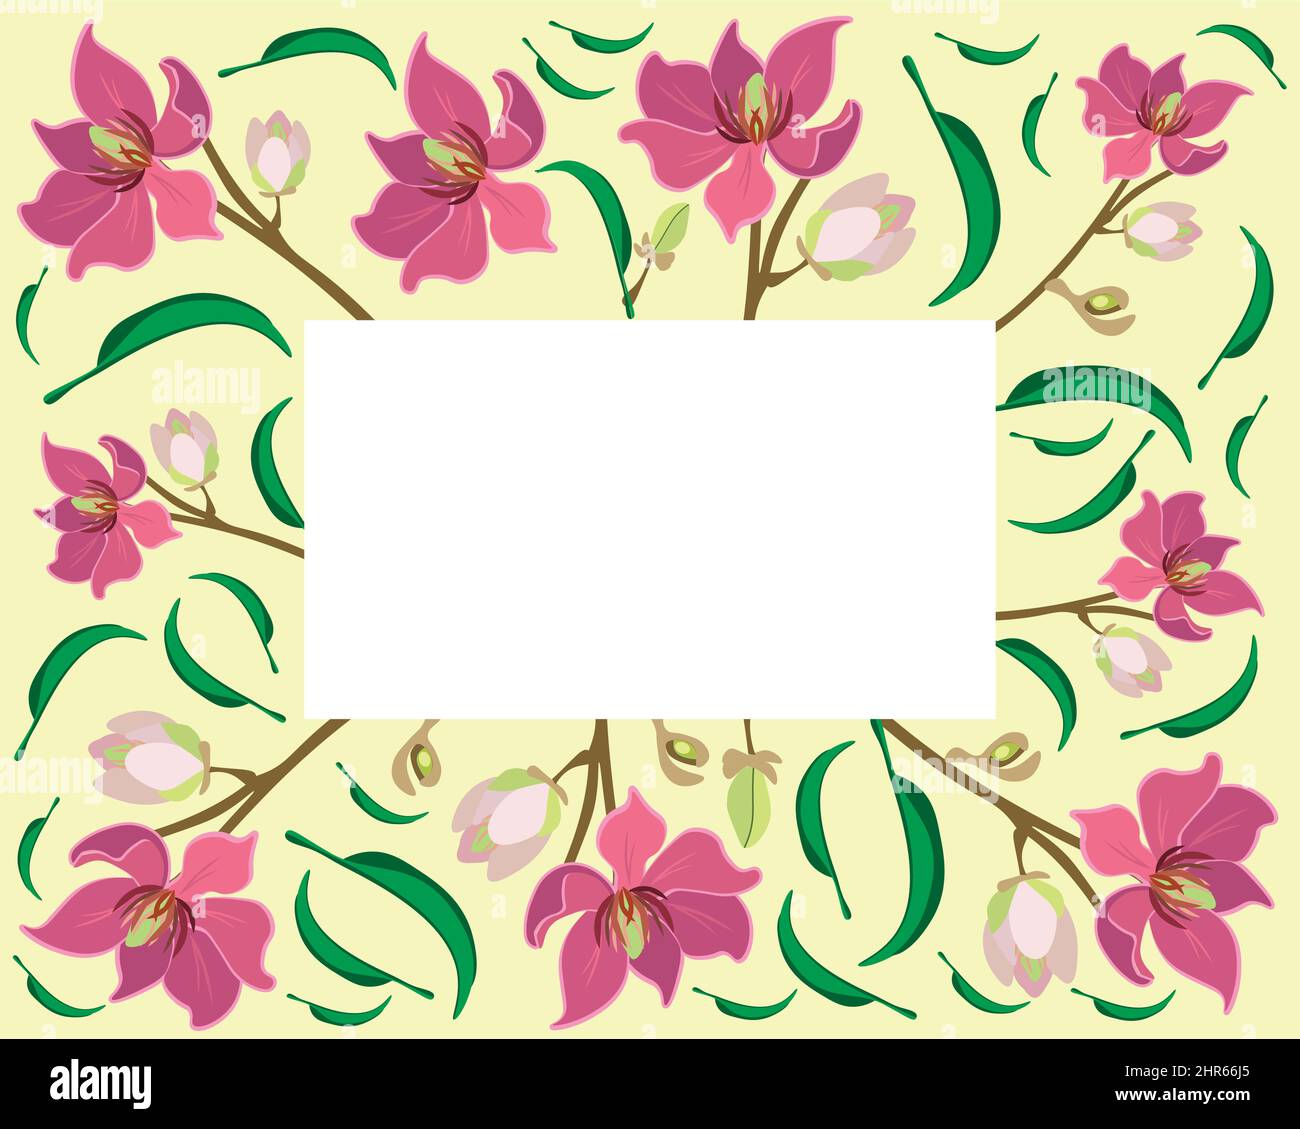 Beautiful Flower, Illustration Frame of Wine Magnolia Flower or Magnolia Figo Flowers with Green Leaves on A Branch. Stock Vector